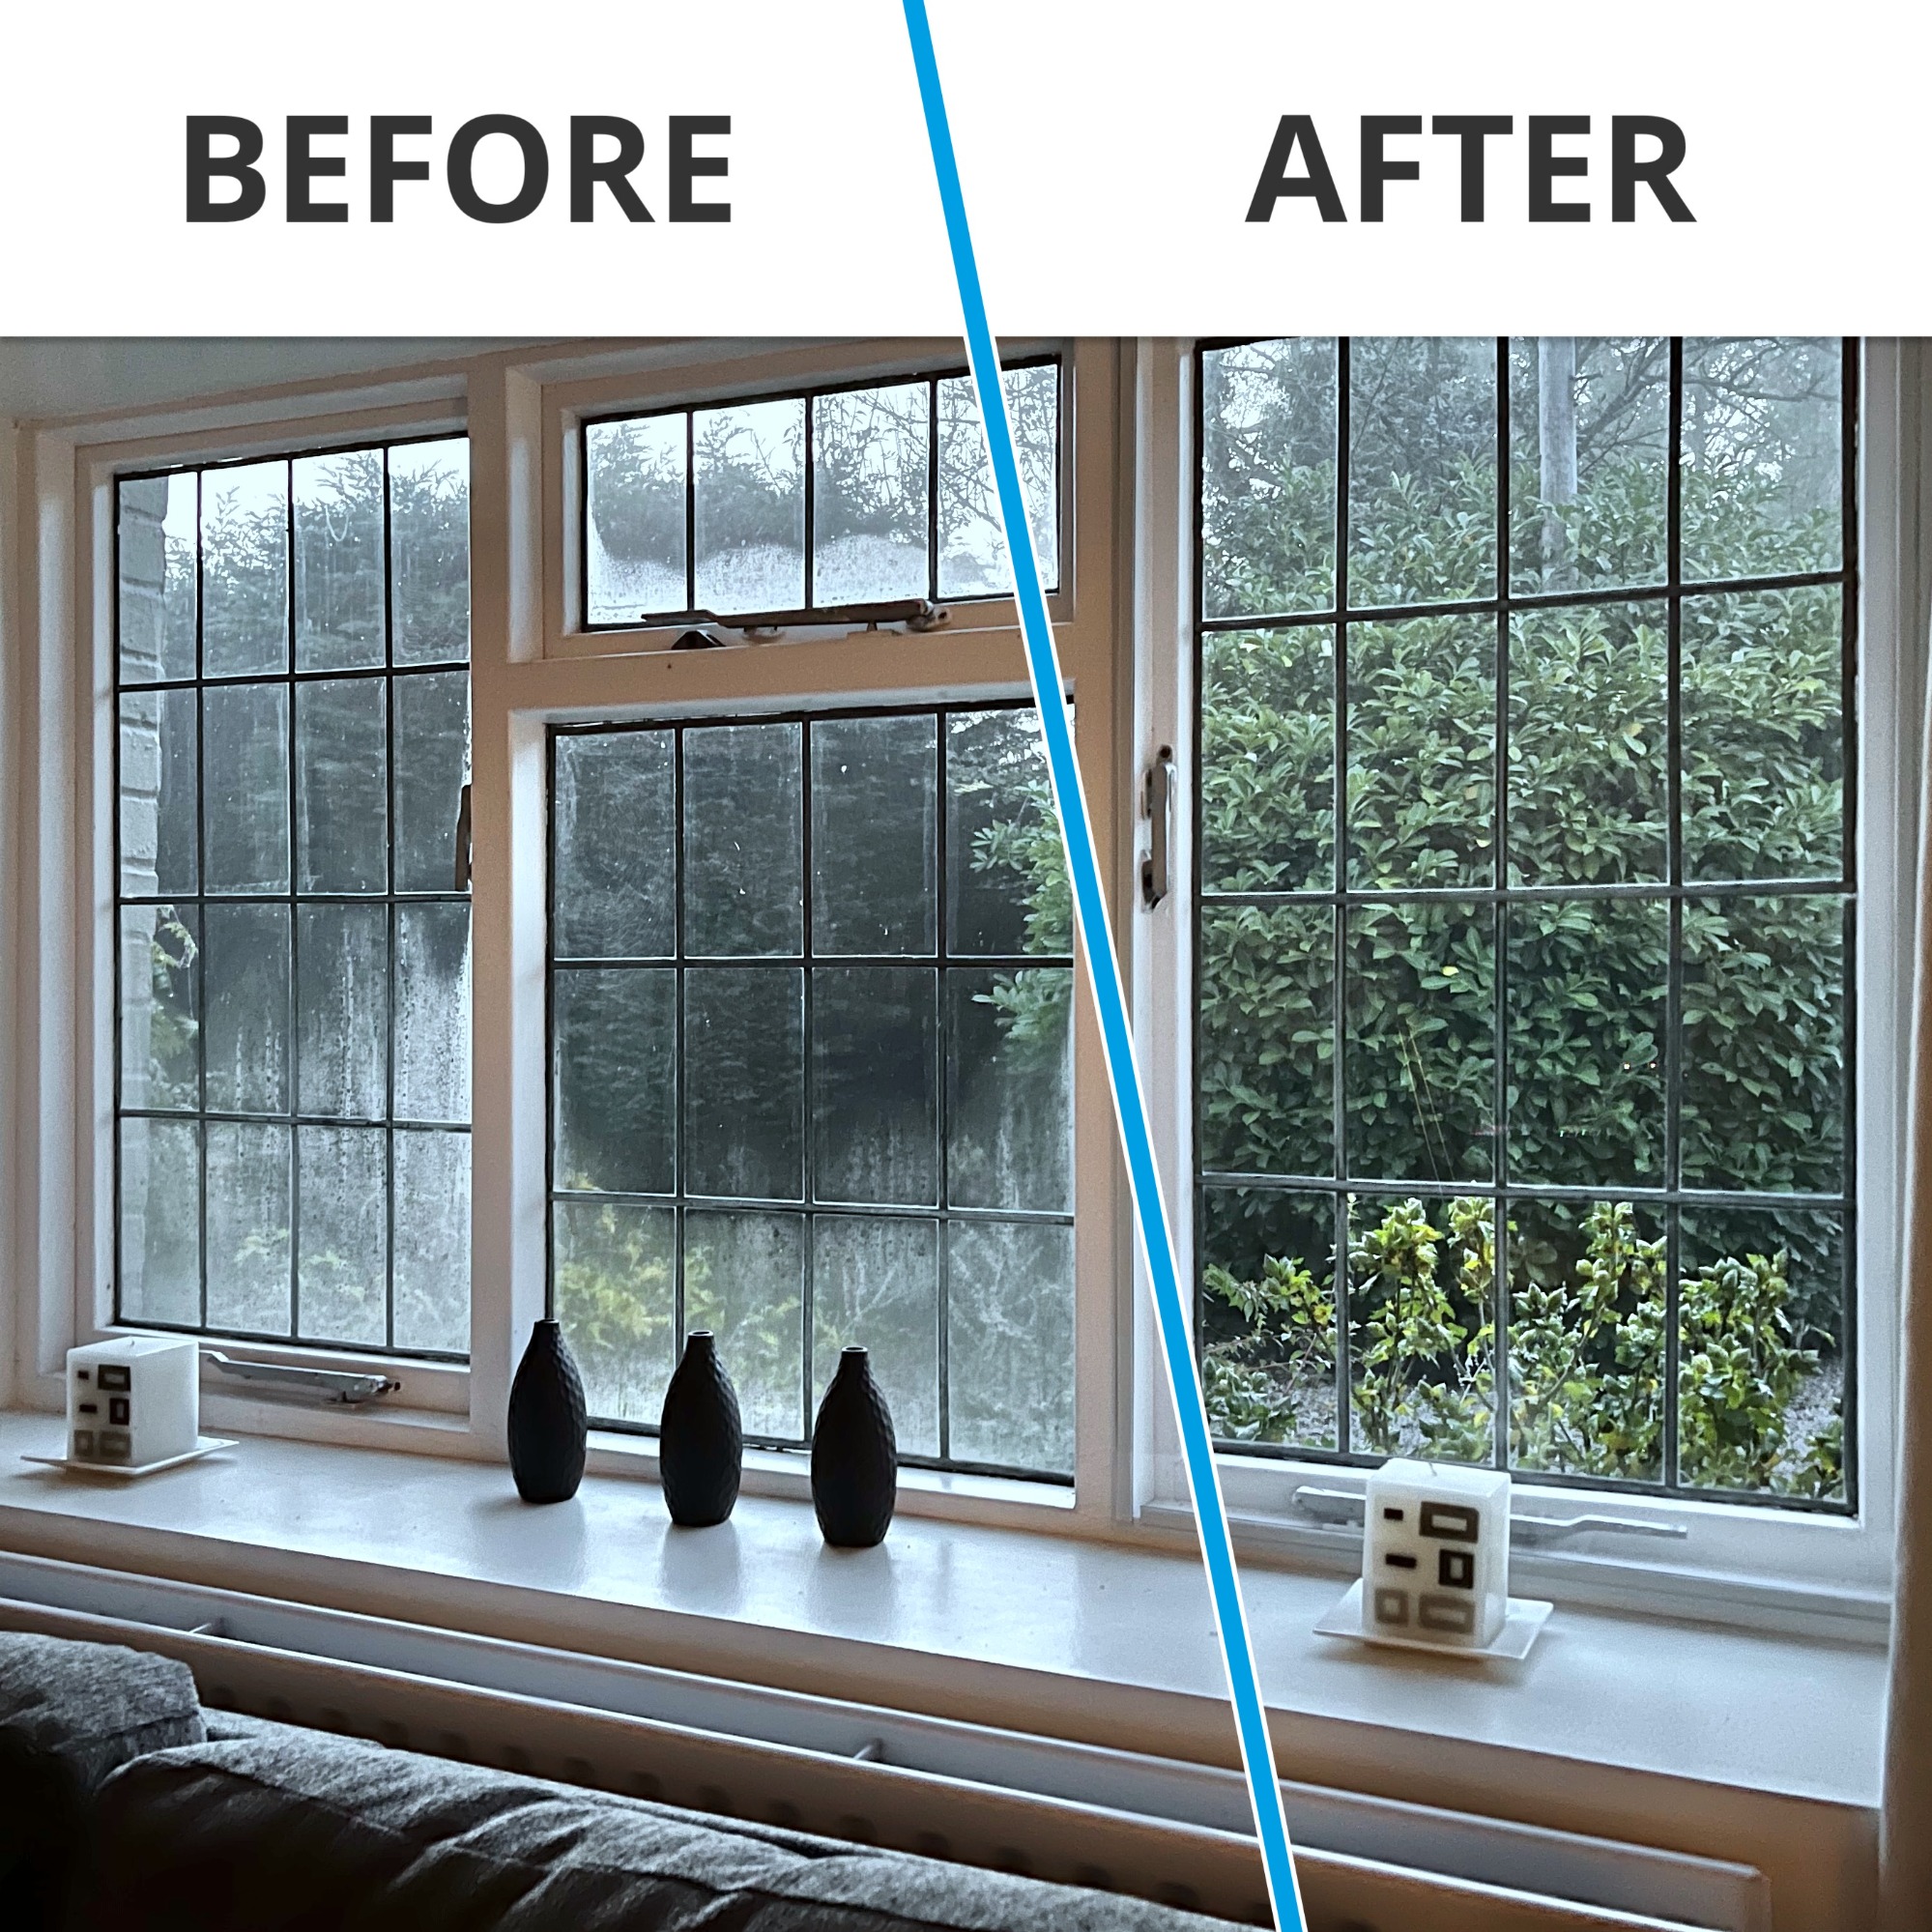 Which Is The Best Type Of Double Glazing? - Which? - Which.co.uk in Leda Perth thumbnail